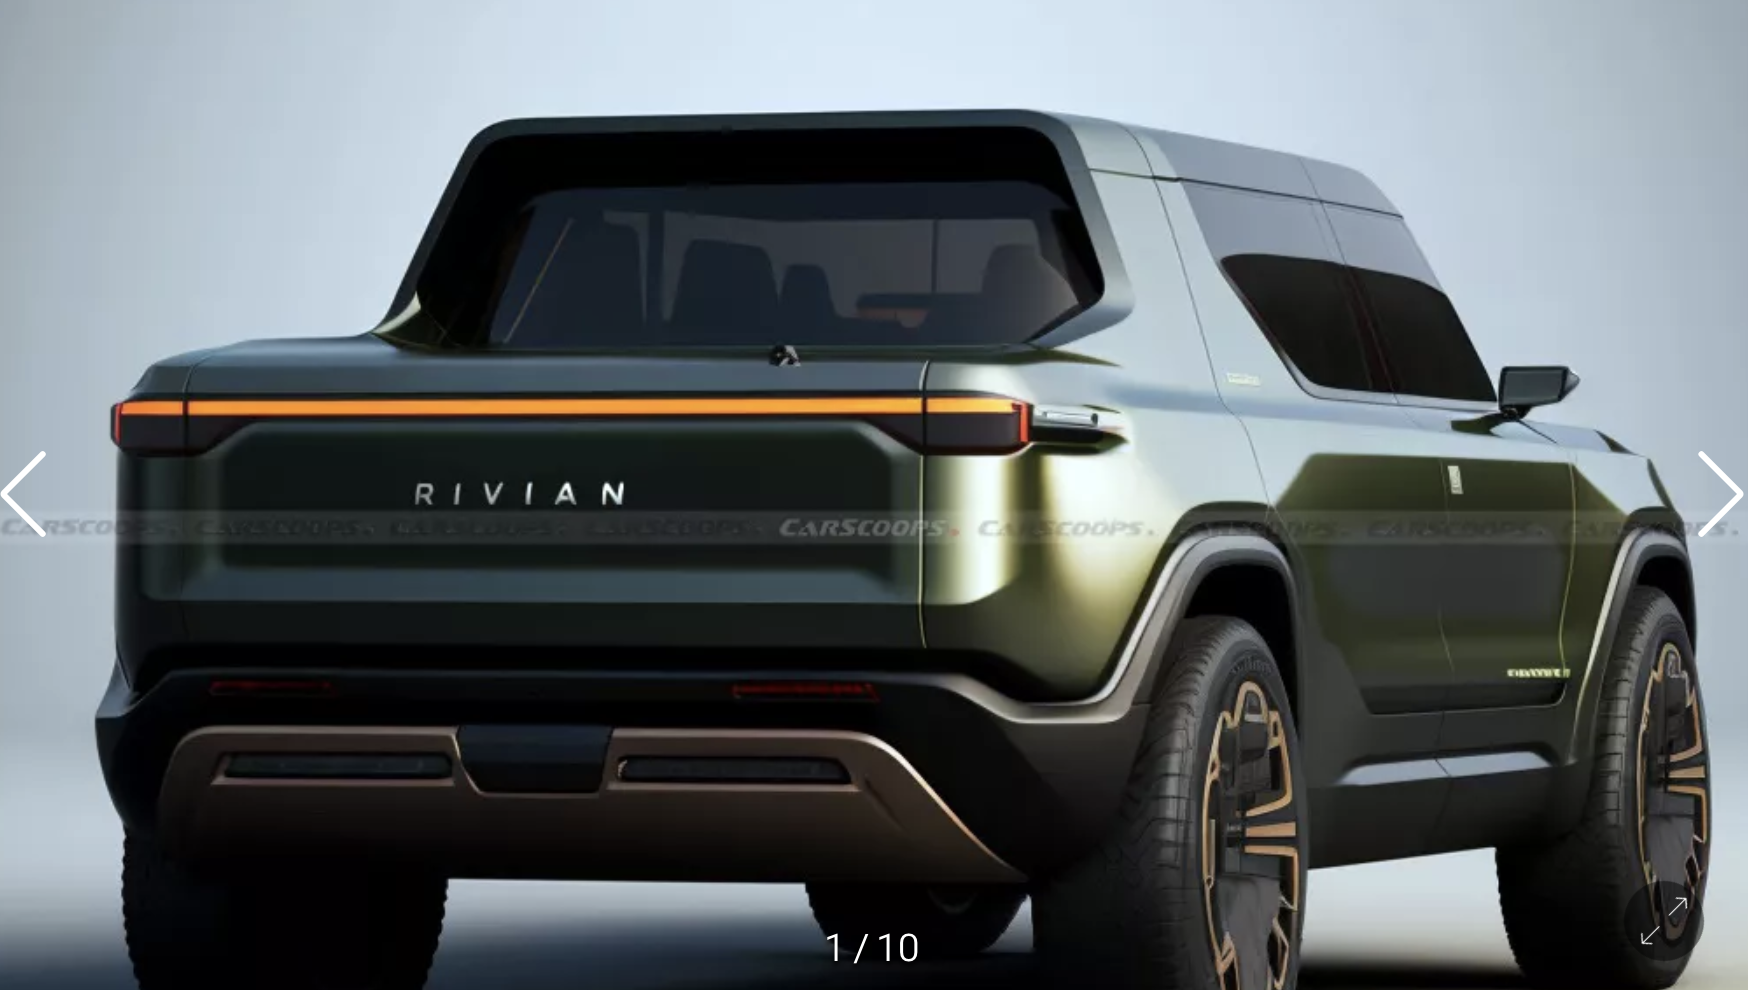 Rivian R2 clay model "revealed" under blanket cover! Screenshot 2023-05-26 at 10.48.59 AM